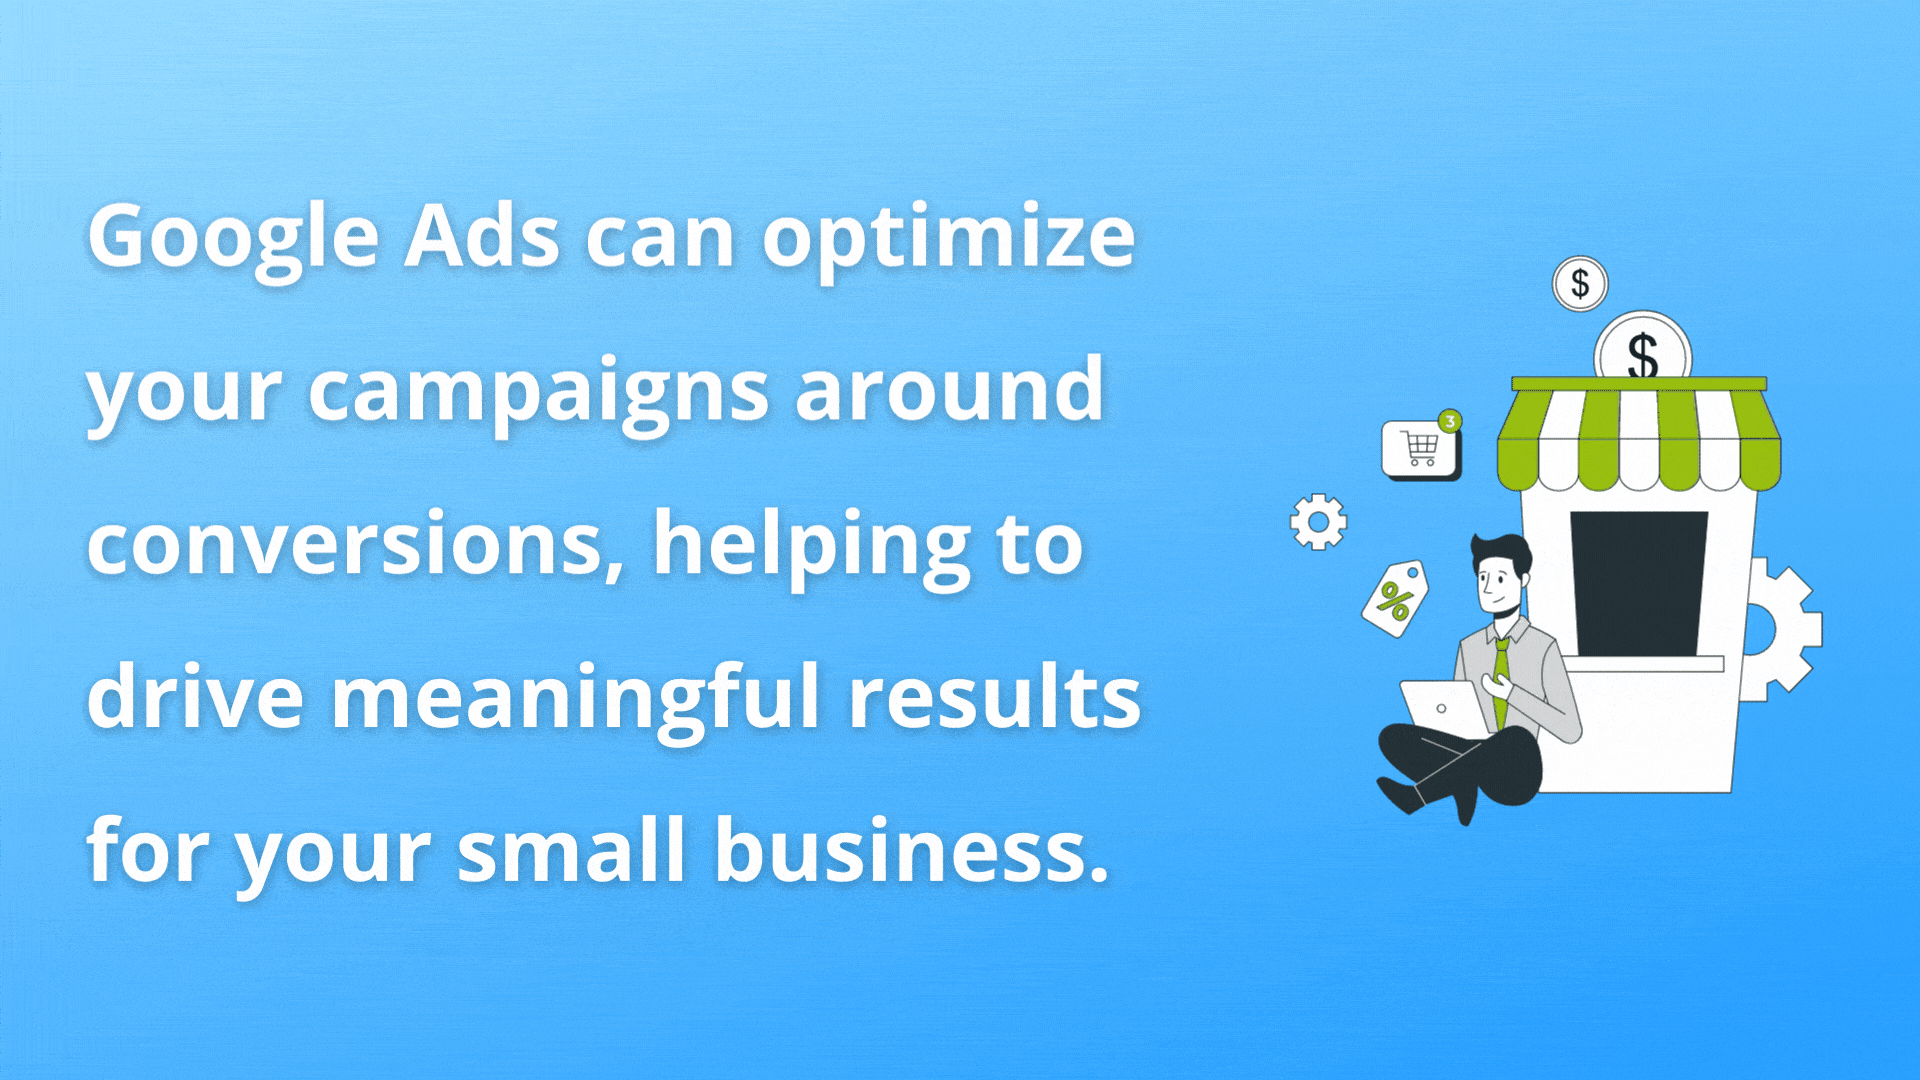 Google Ads can optimize around conversions